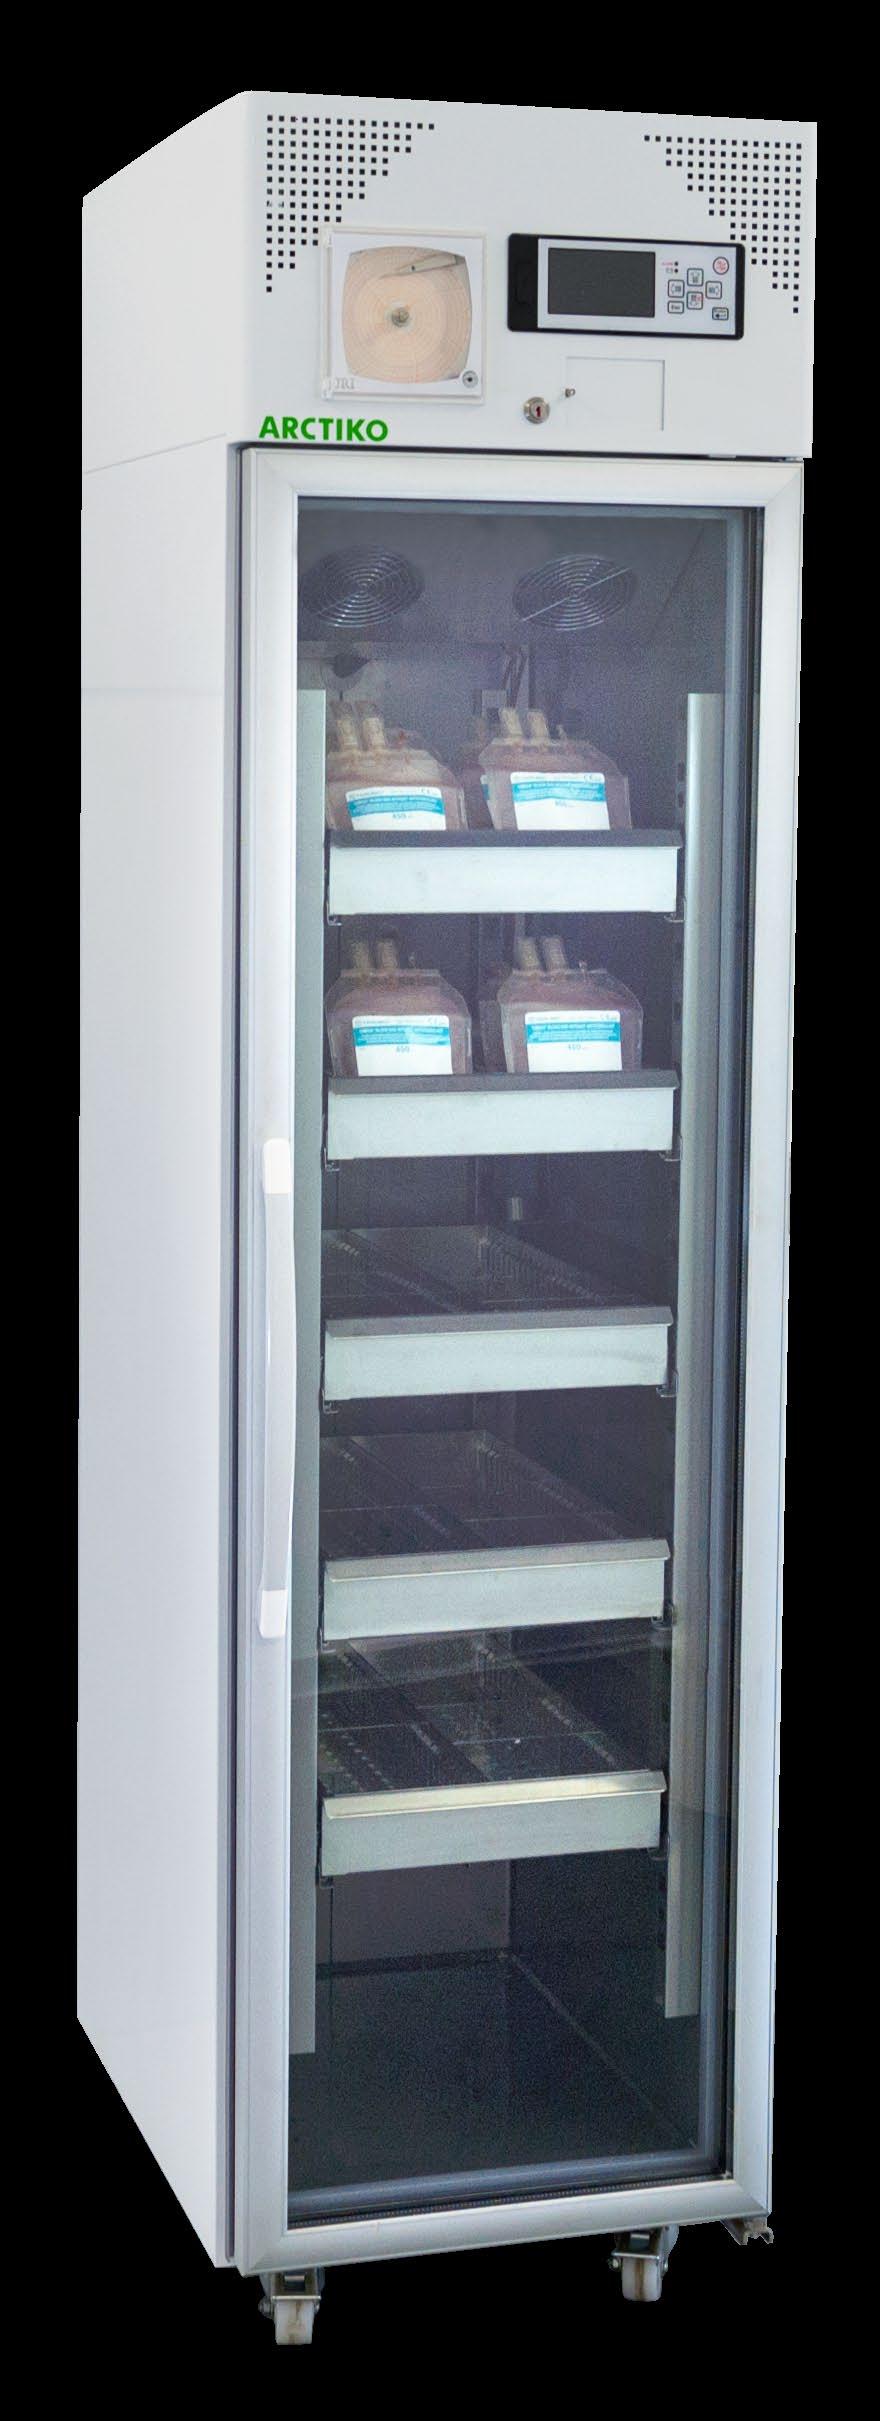 Blood bank refrigerators Cold storage of blood is crucial in light of continuing advancements in medical science.